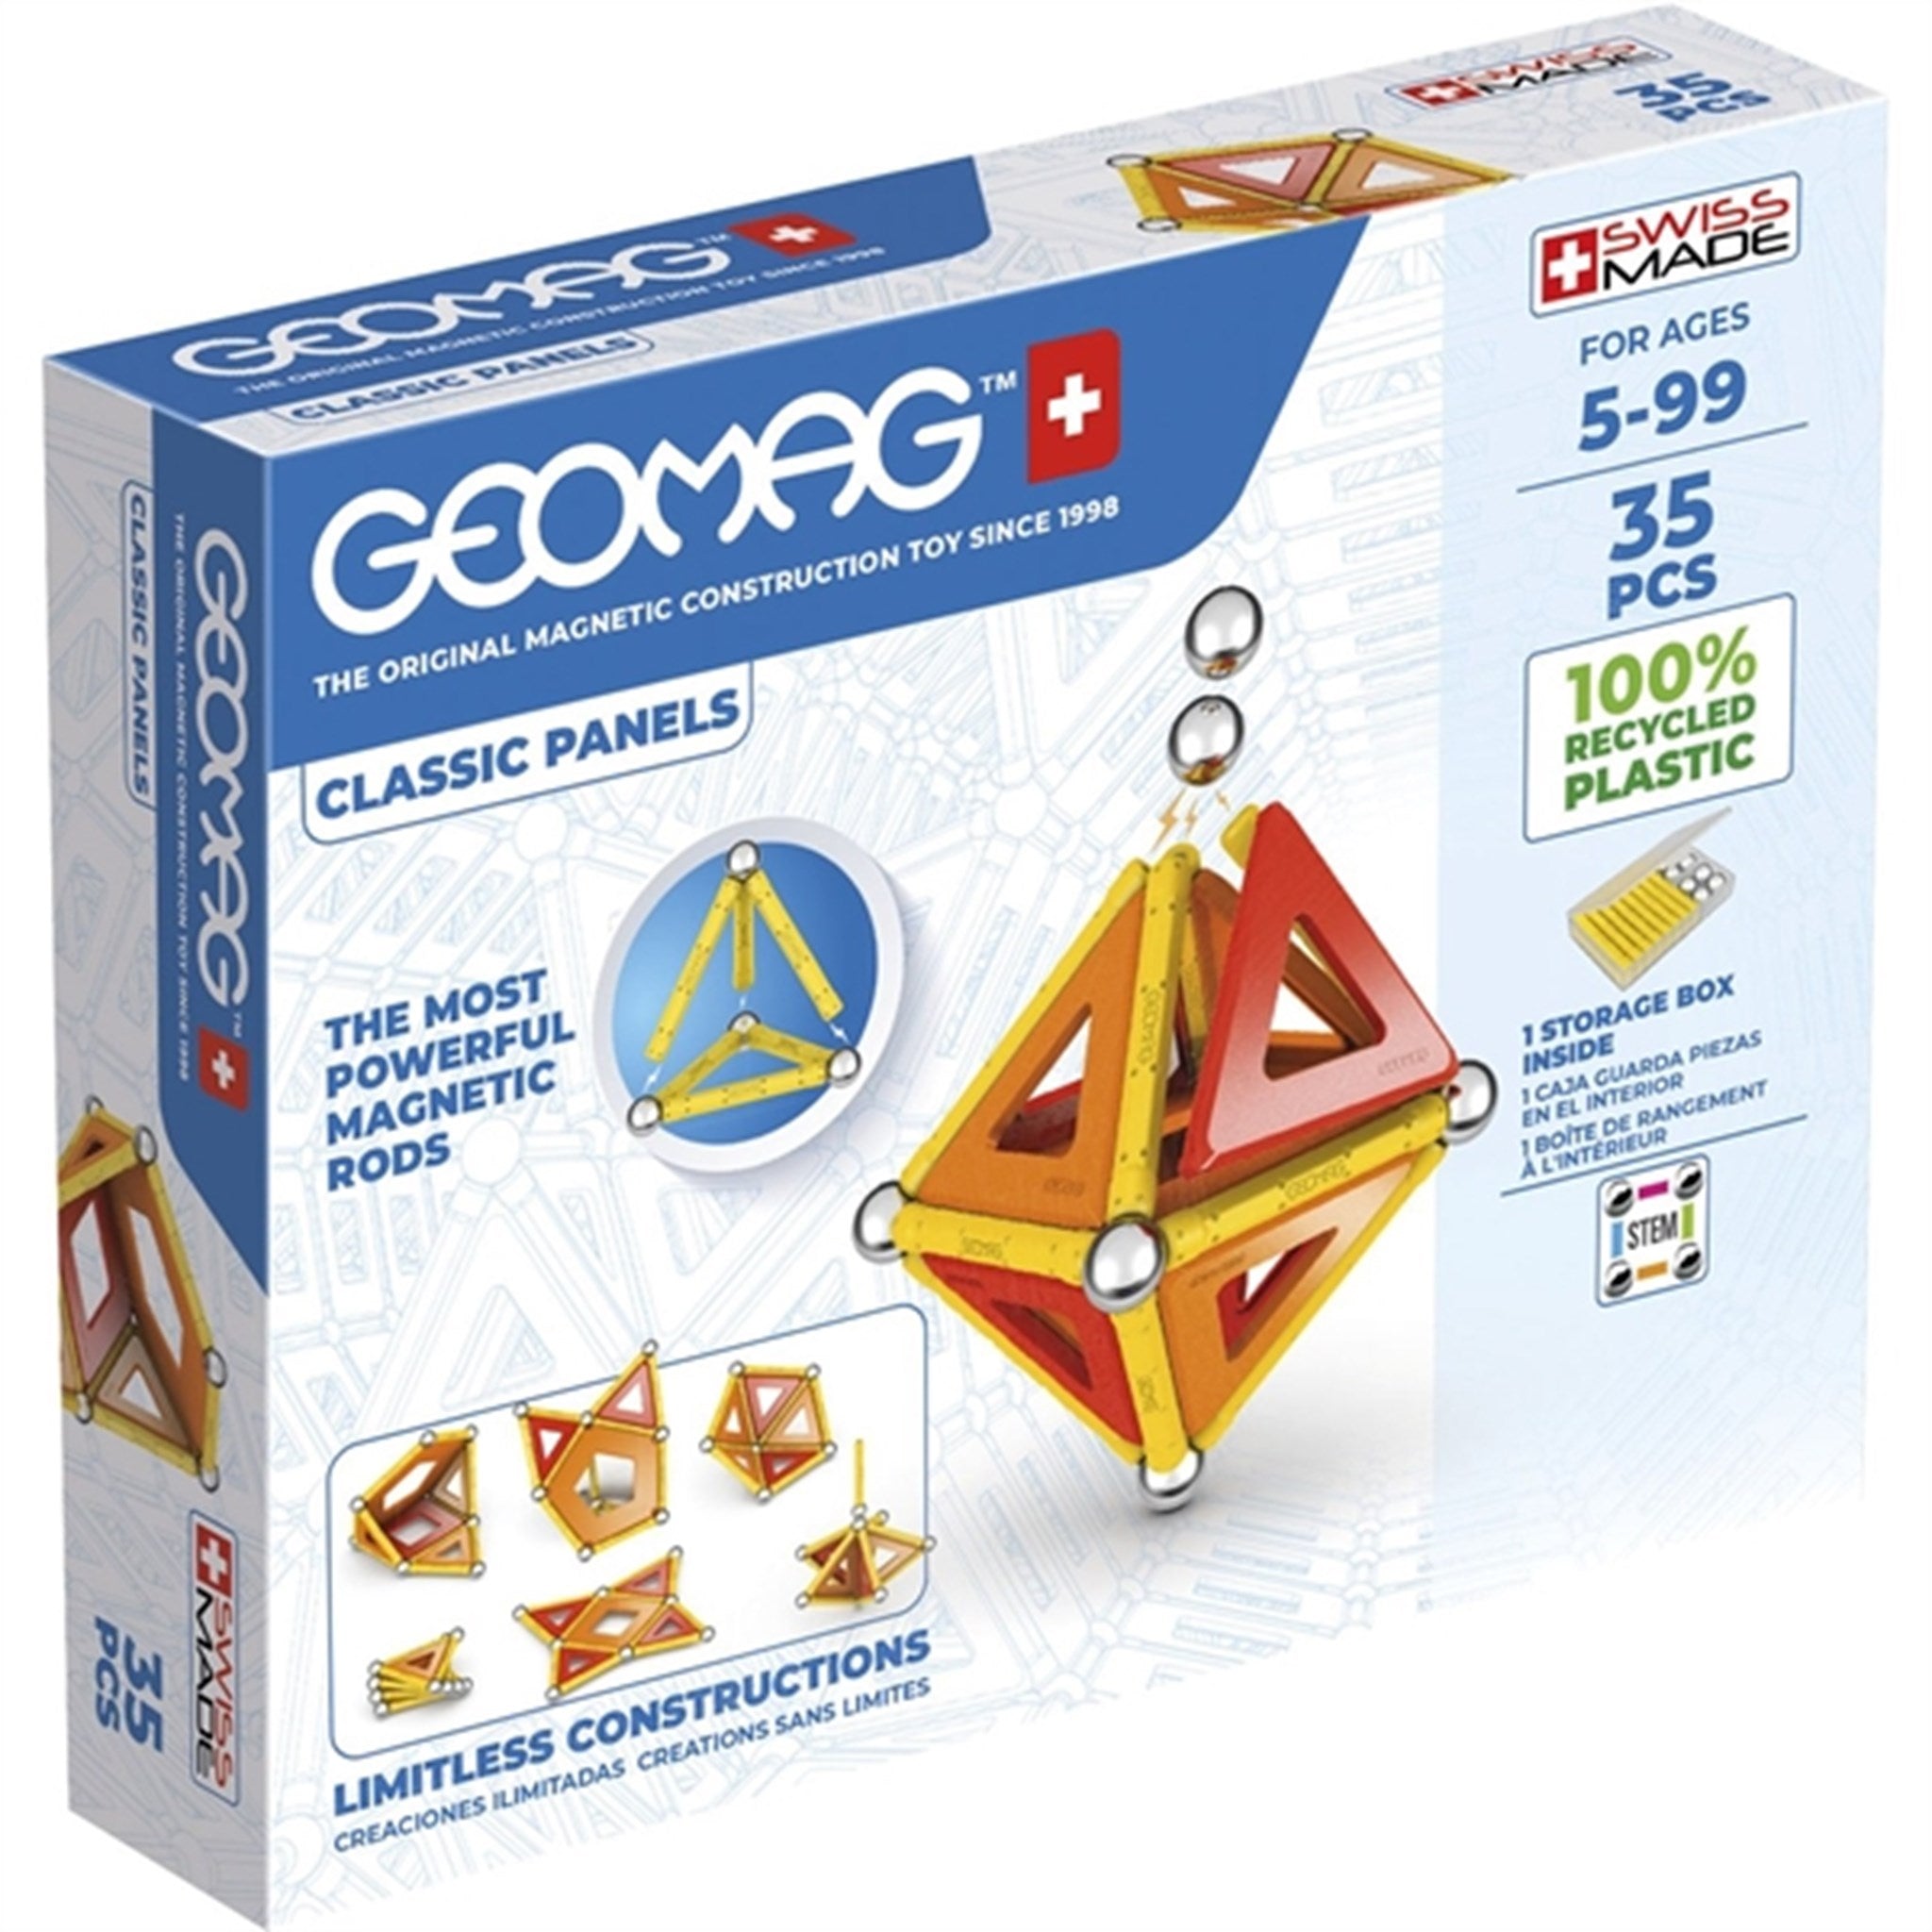 Geomag Classic Panels Recycled 35 stk